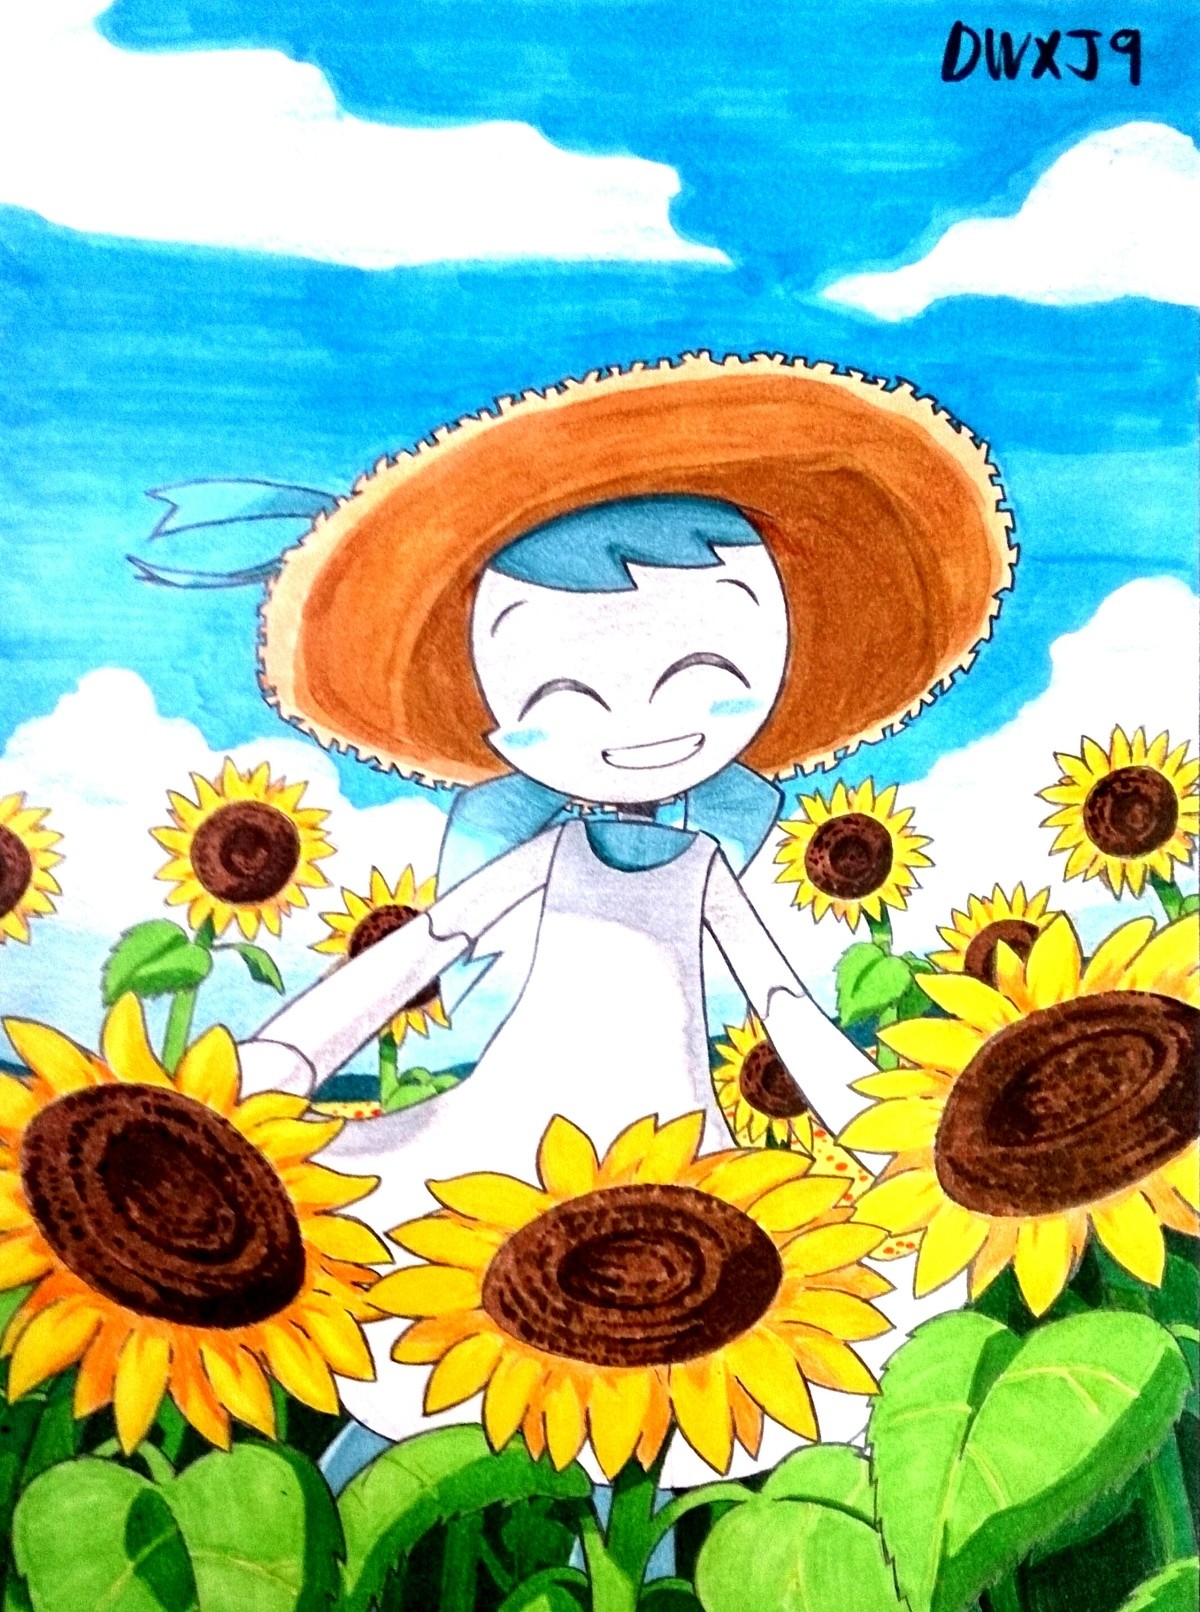 Frolicking in the Flowerfields. .. She's a beep booping sunflower.